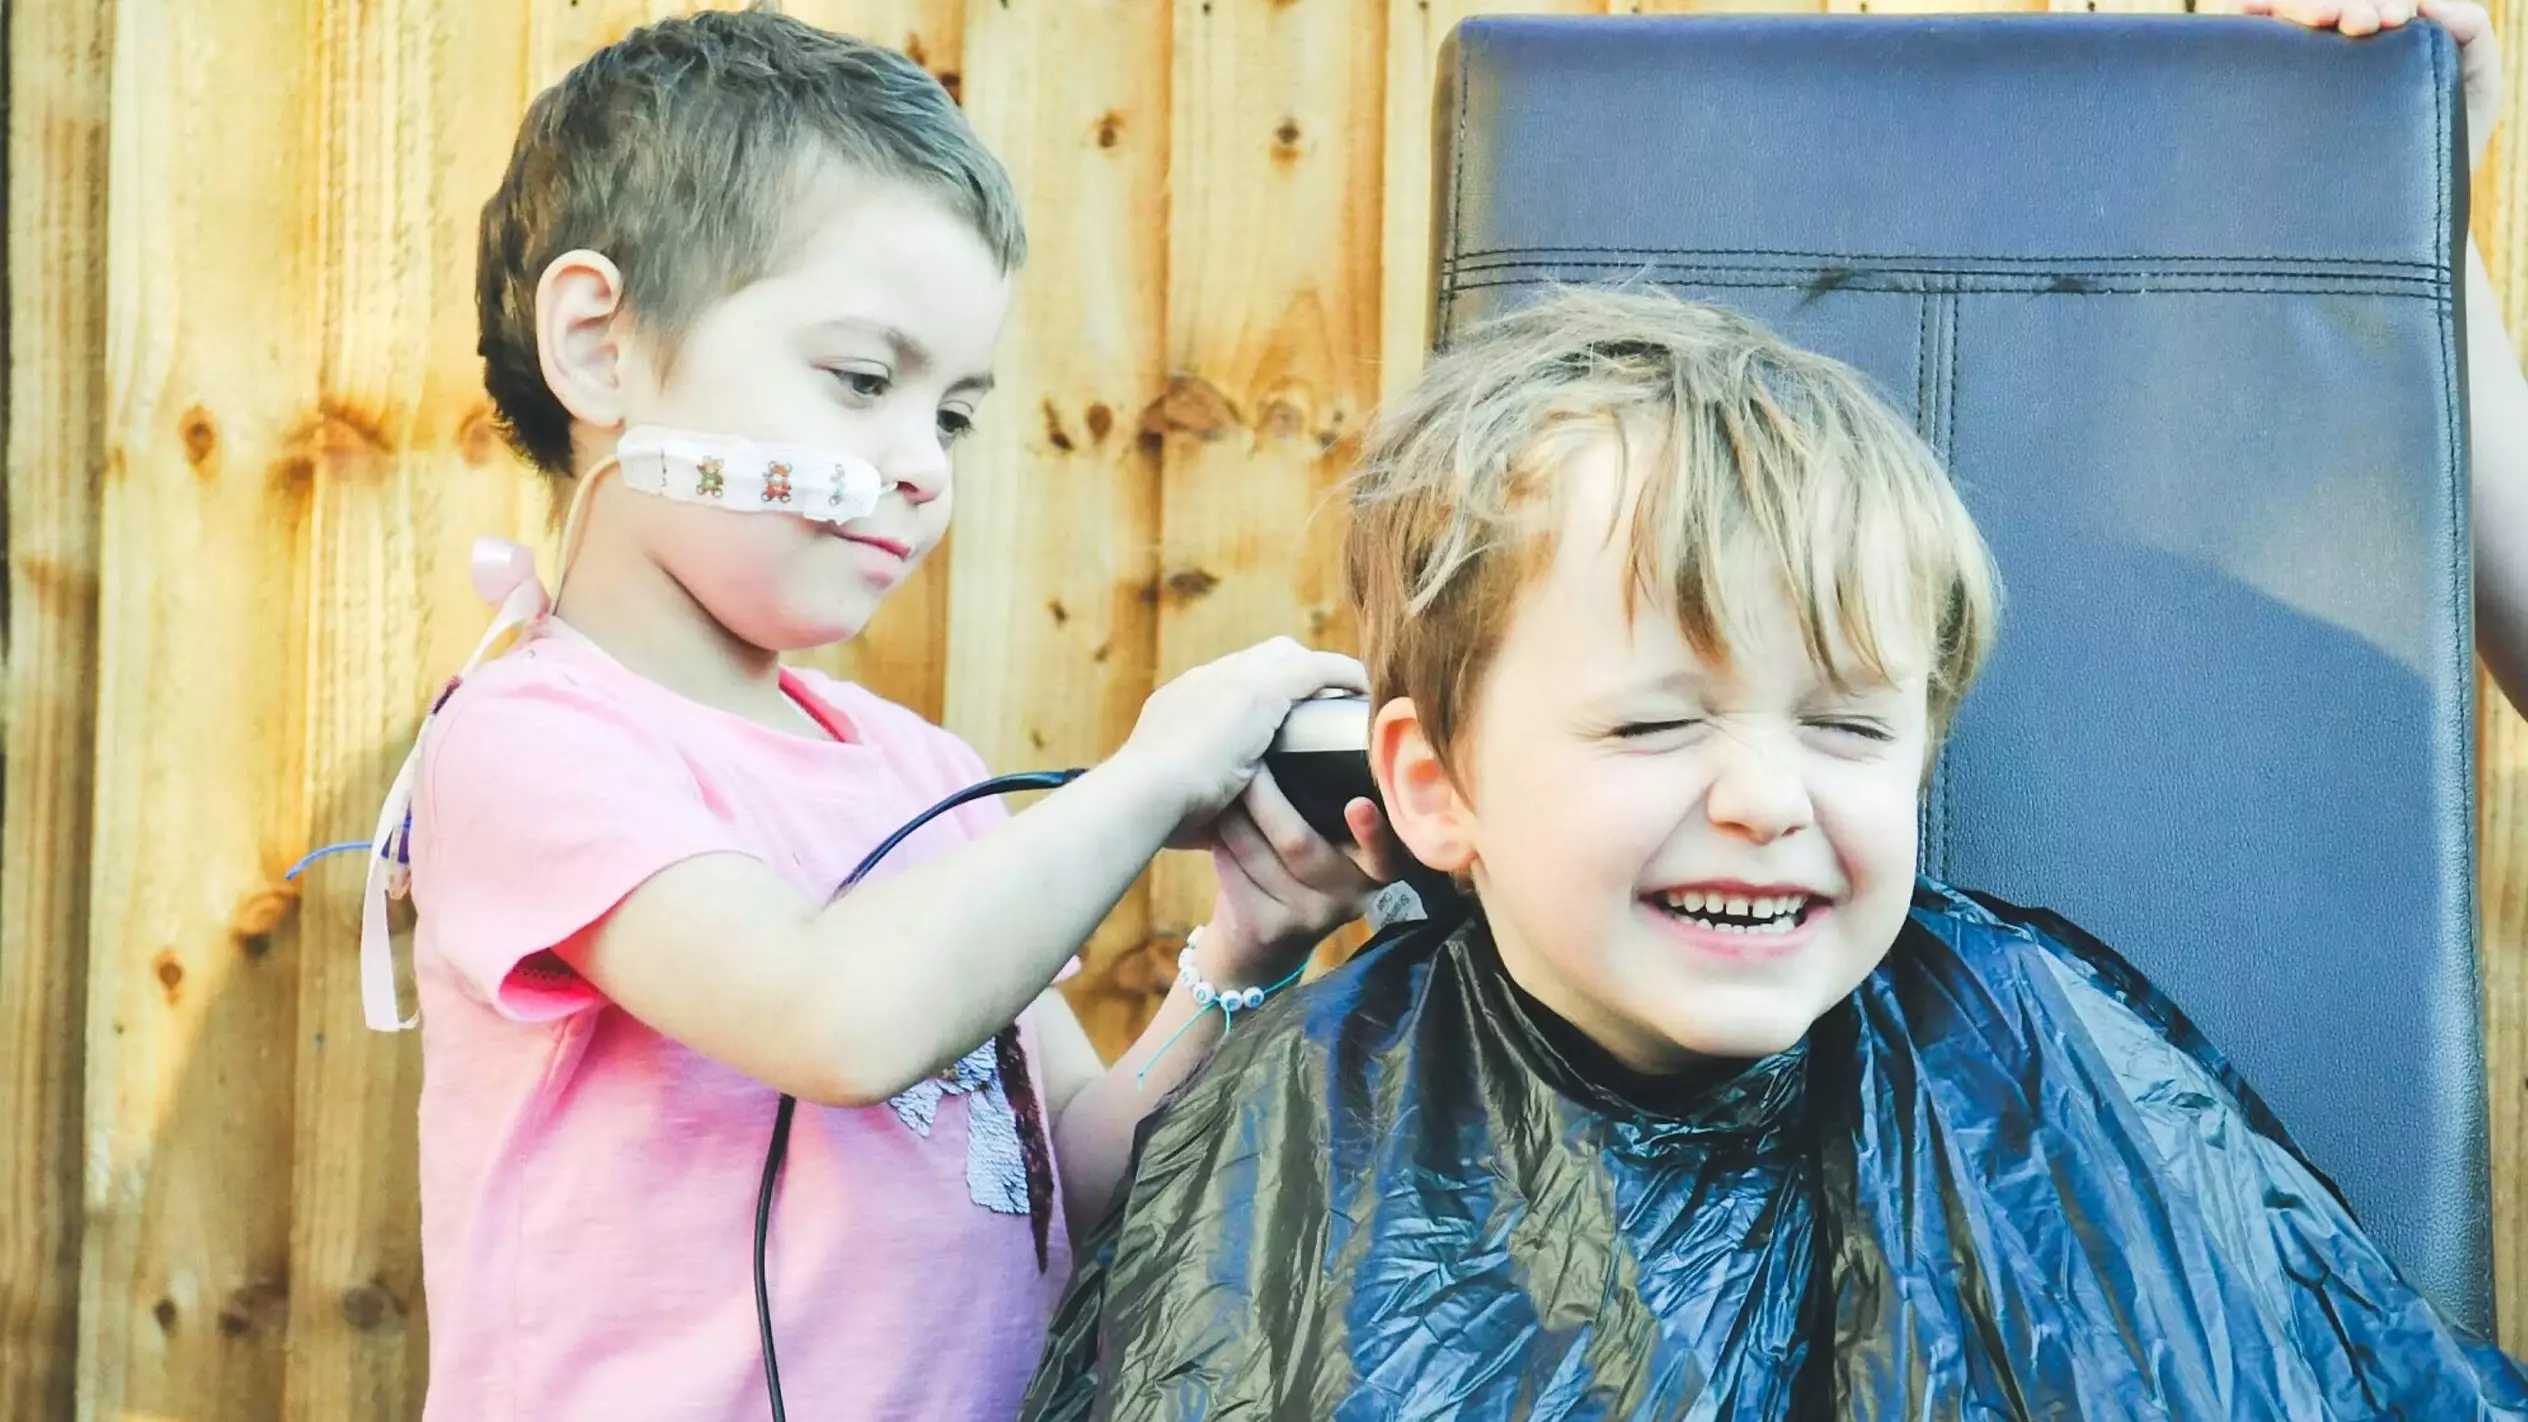 Boy, 6, Shaves Head To Be Just Like Best Friend With Cancer